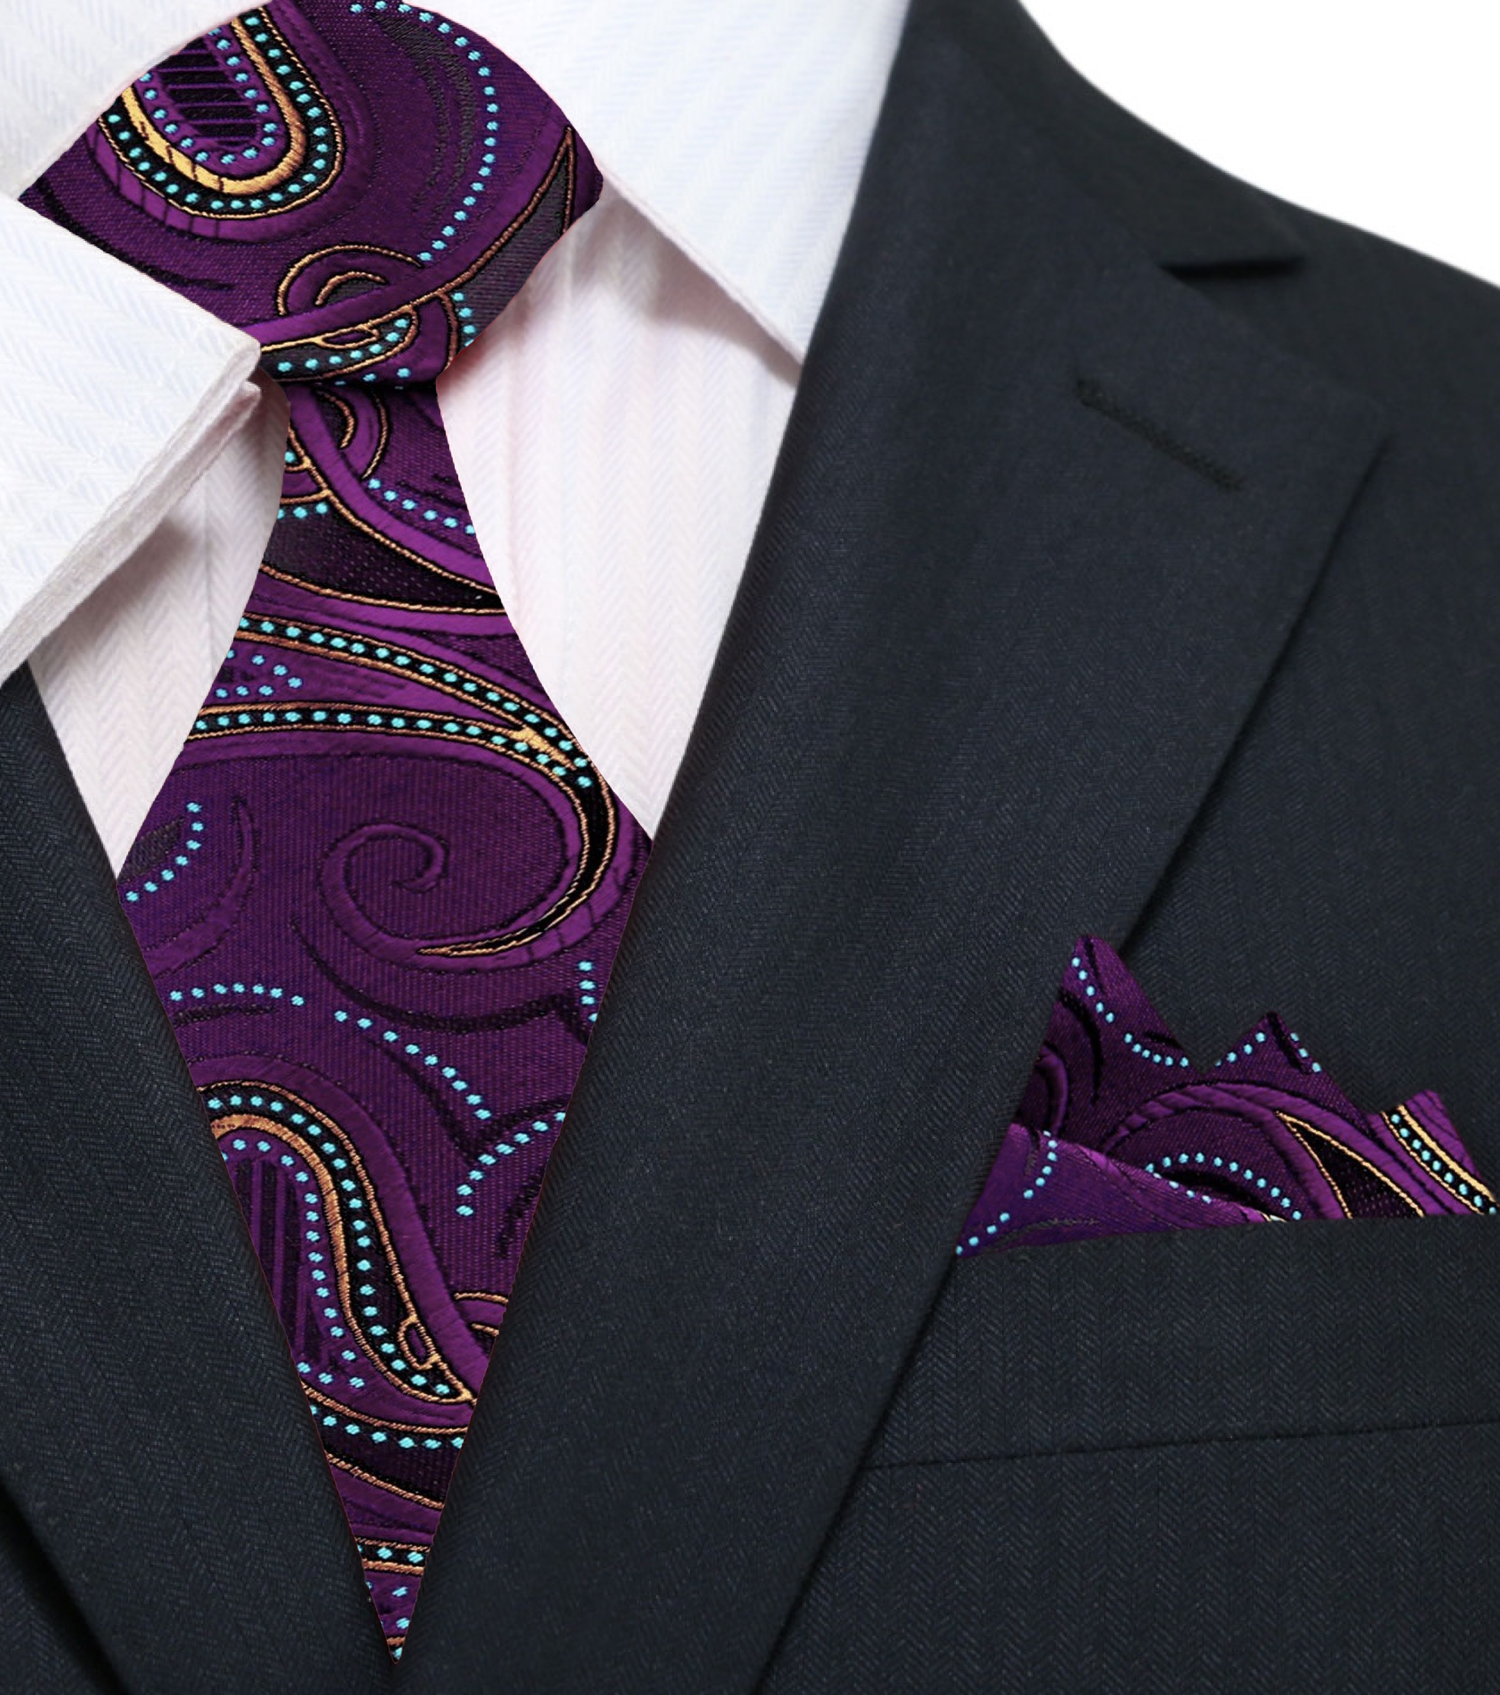 Main View: Purple Paisley Necktie with Matching Pocket Square